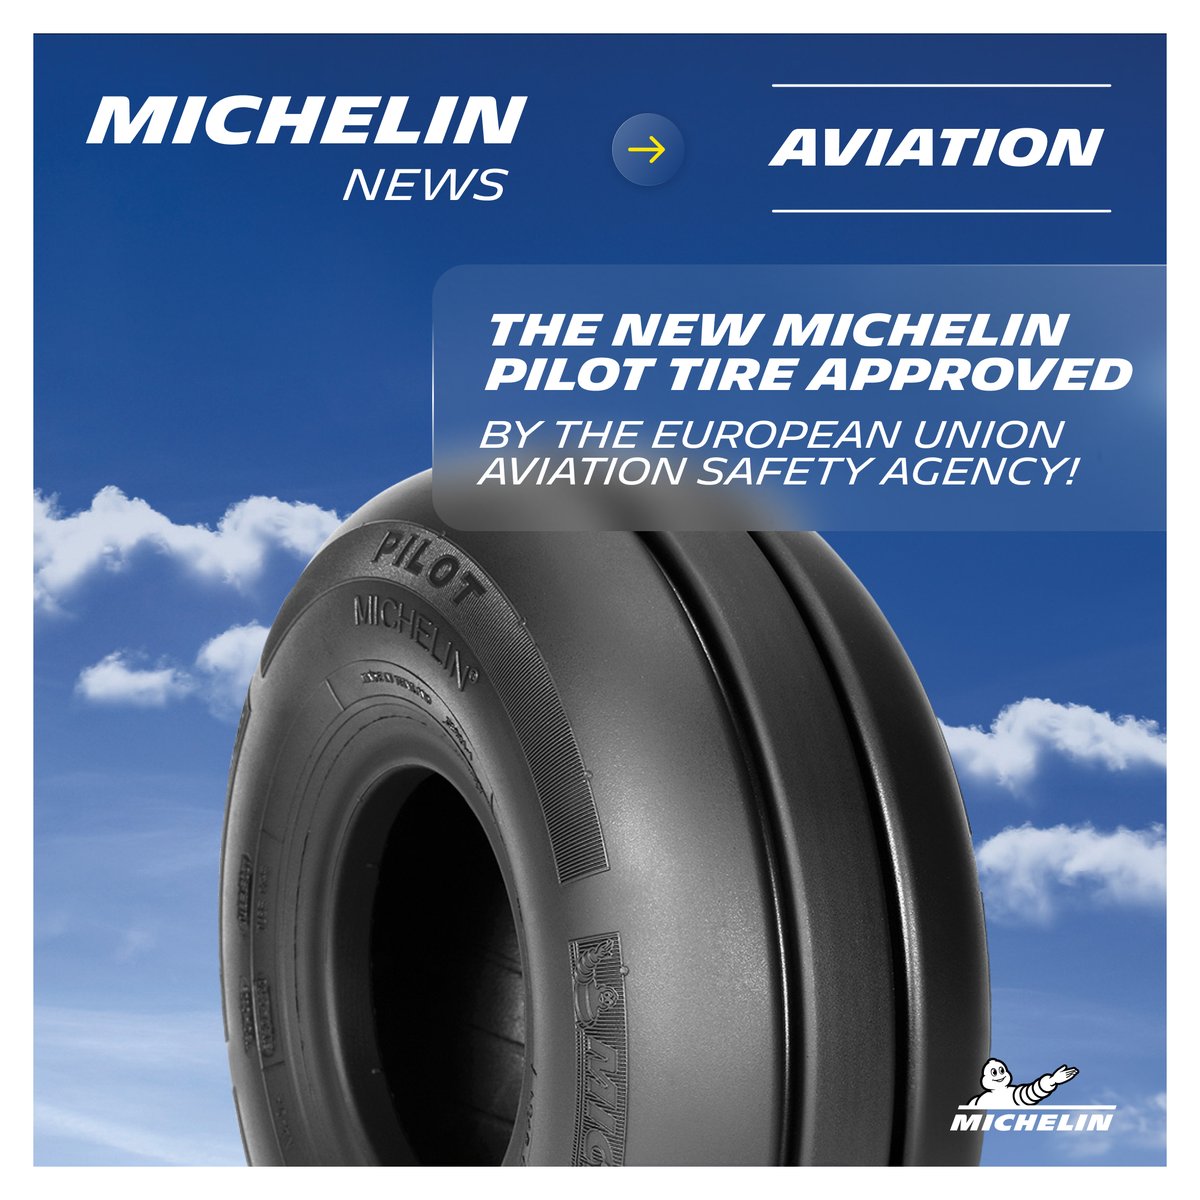 The new Michelin Pilot tire approved by the @EASA! 

After the @FAANews approval, the EASA has also certified the new Michelin Pilot tire, which has established performance standards never-before achieved in the General Aviation category.